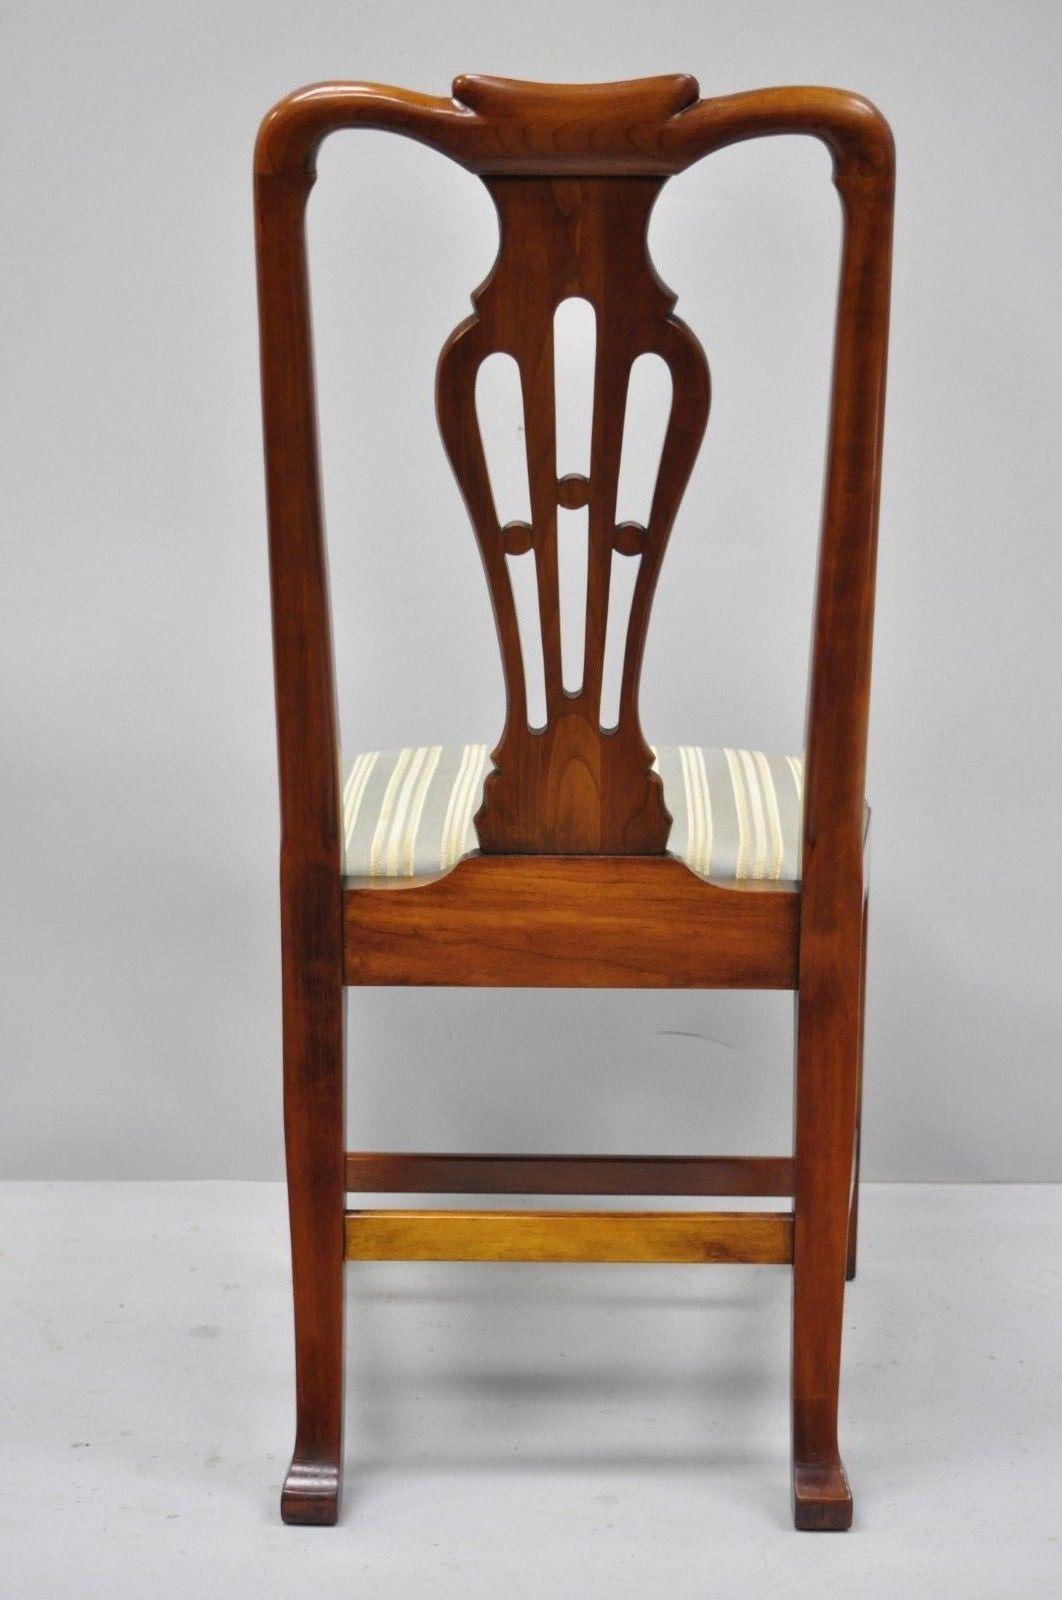 Wood 6 Statton Centennial Cherry Chippendale Style Dining Chairs for Duckloe